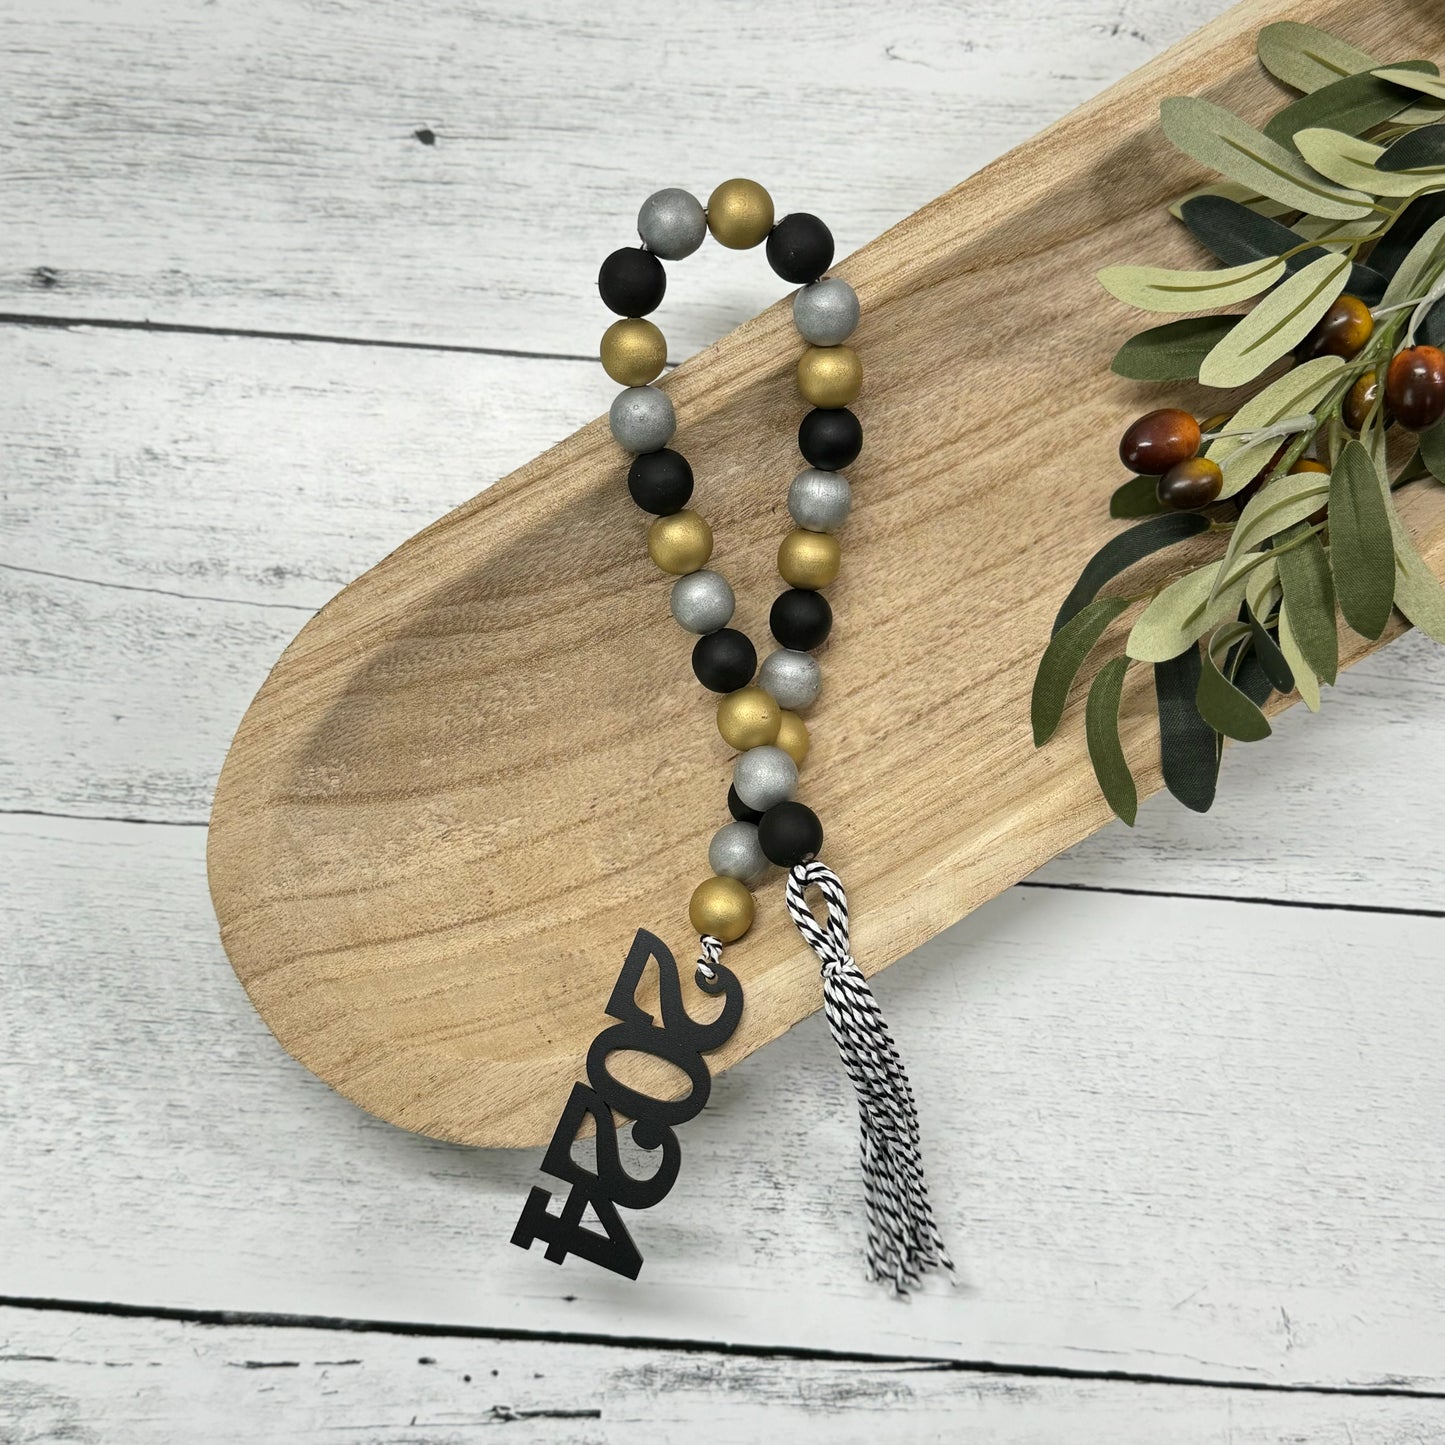 New Years Themed Wooden Bead Garland